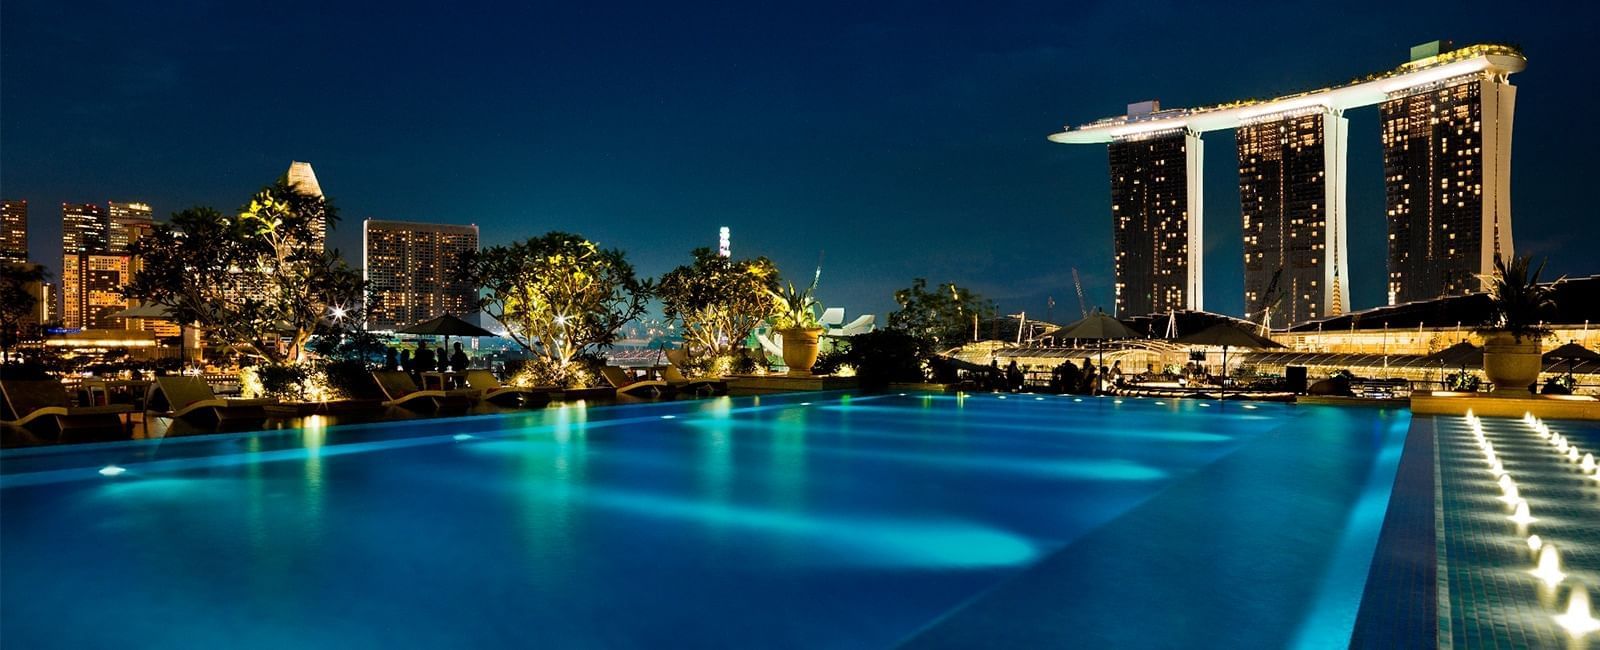 The pool and the city view at night